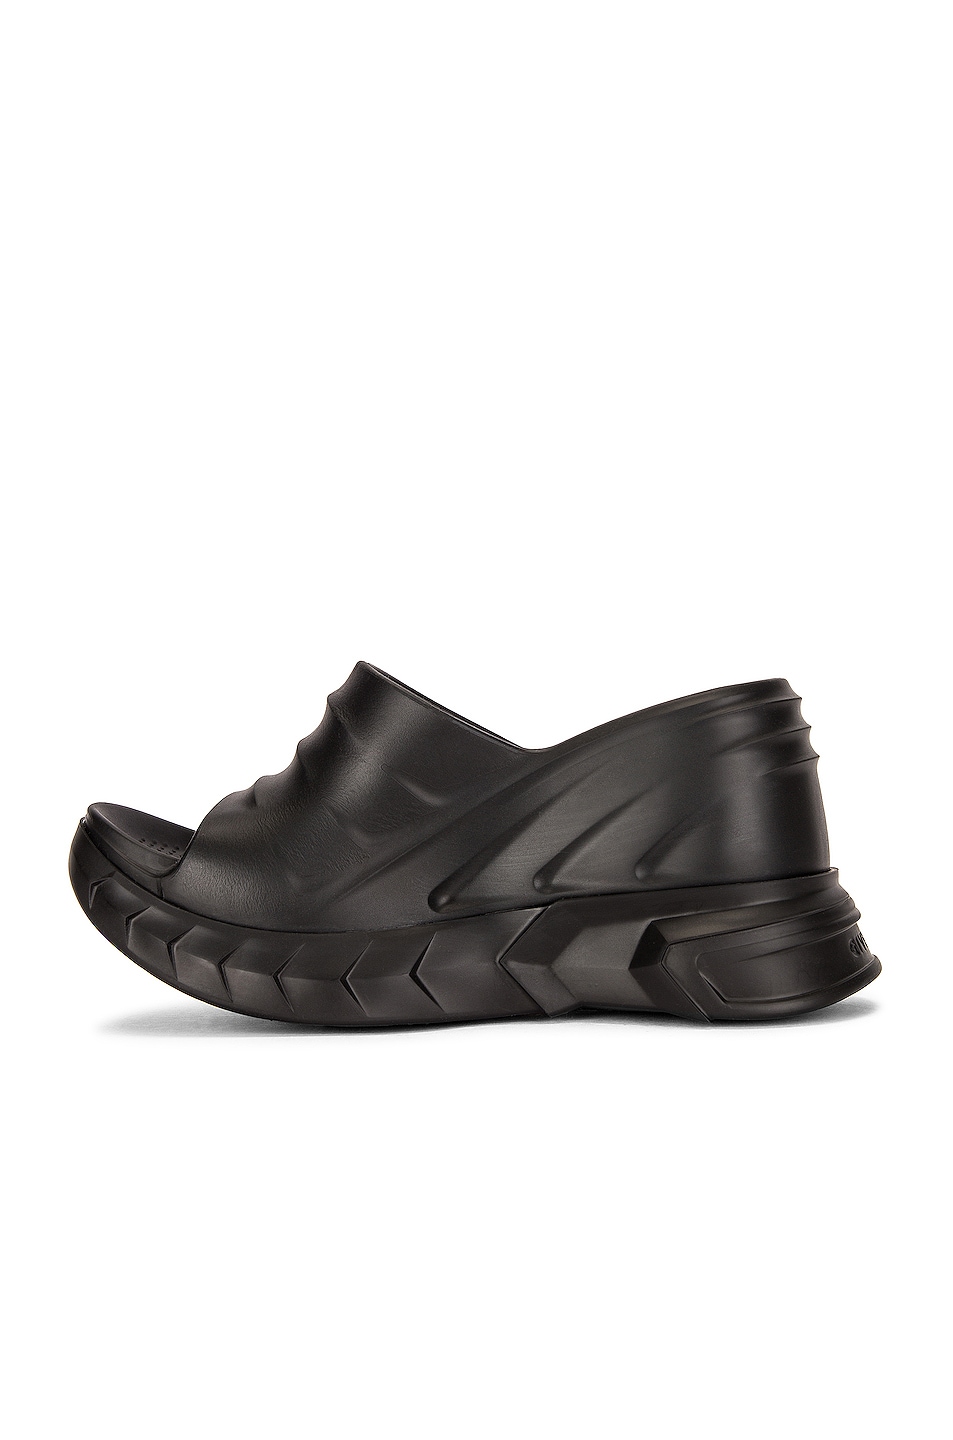 Givenchy Marshmallow Slider Wedge Sandals in Black | FWRD